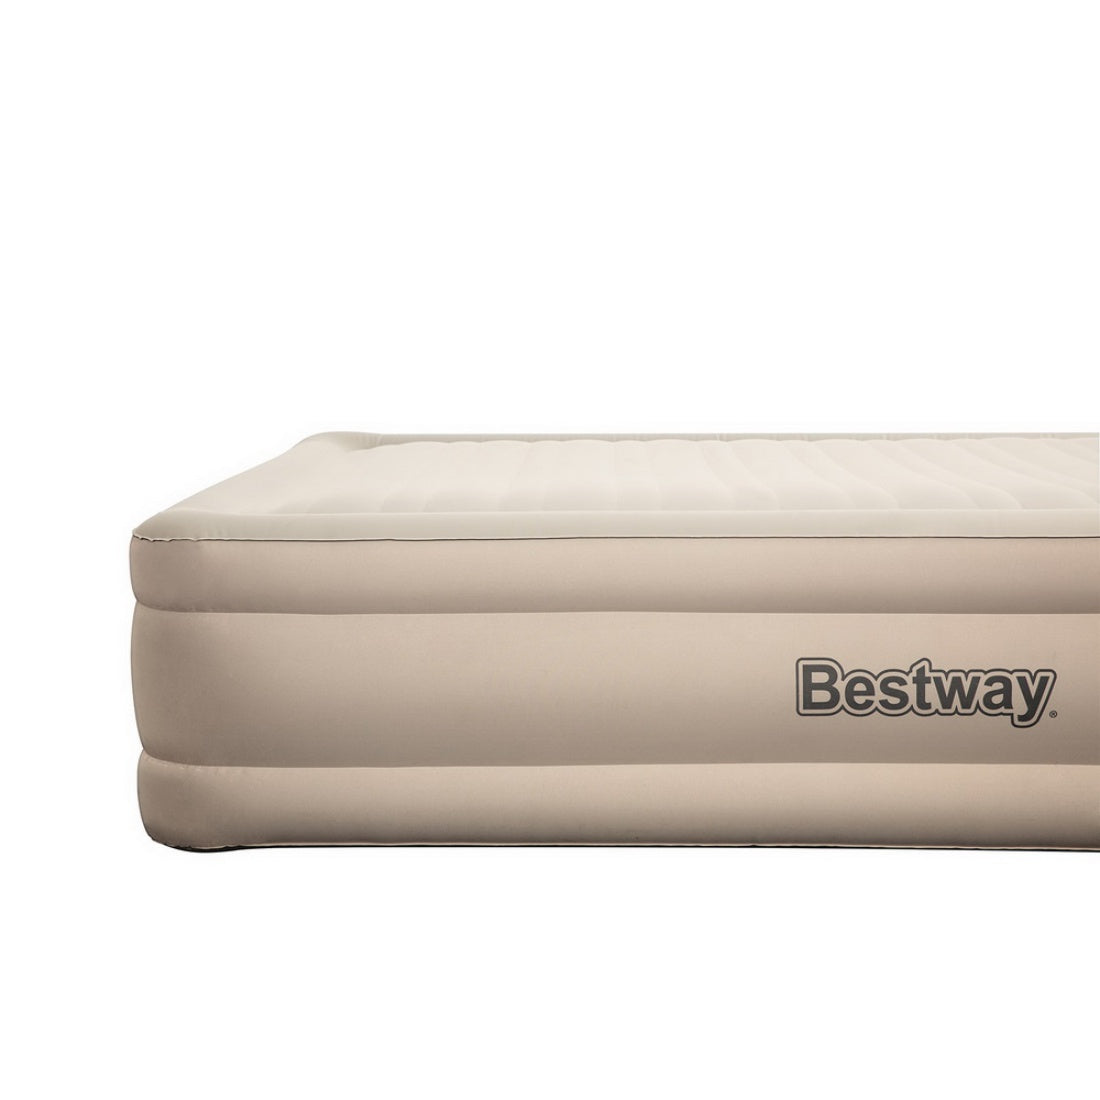 Bestway Inflatable Queen Air Bed Home Blow Up Mattress Built-in Pump Camping